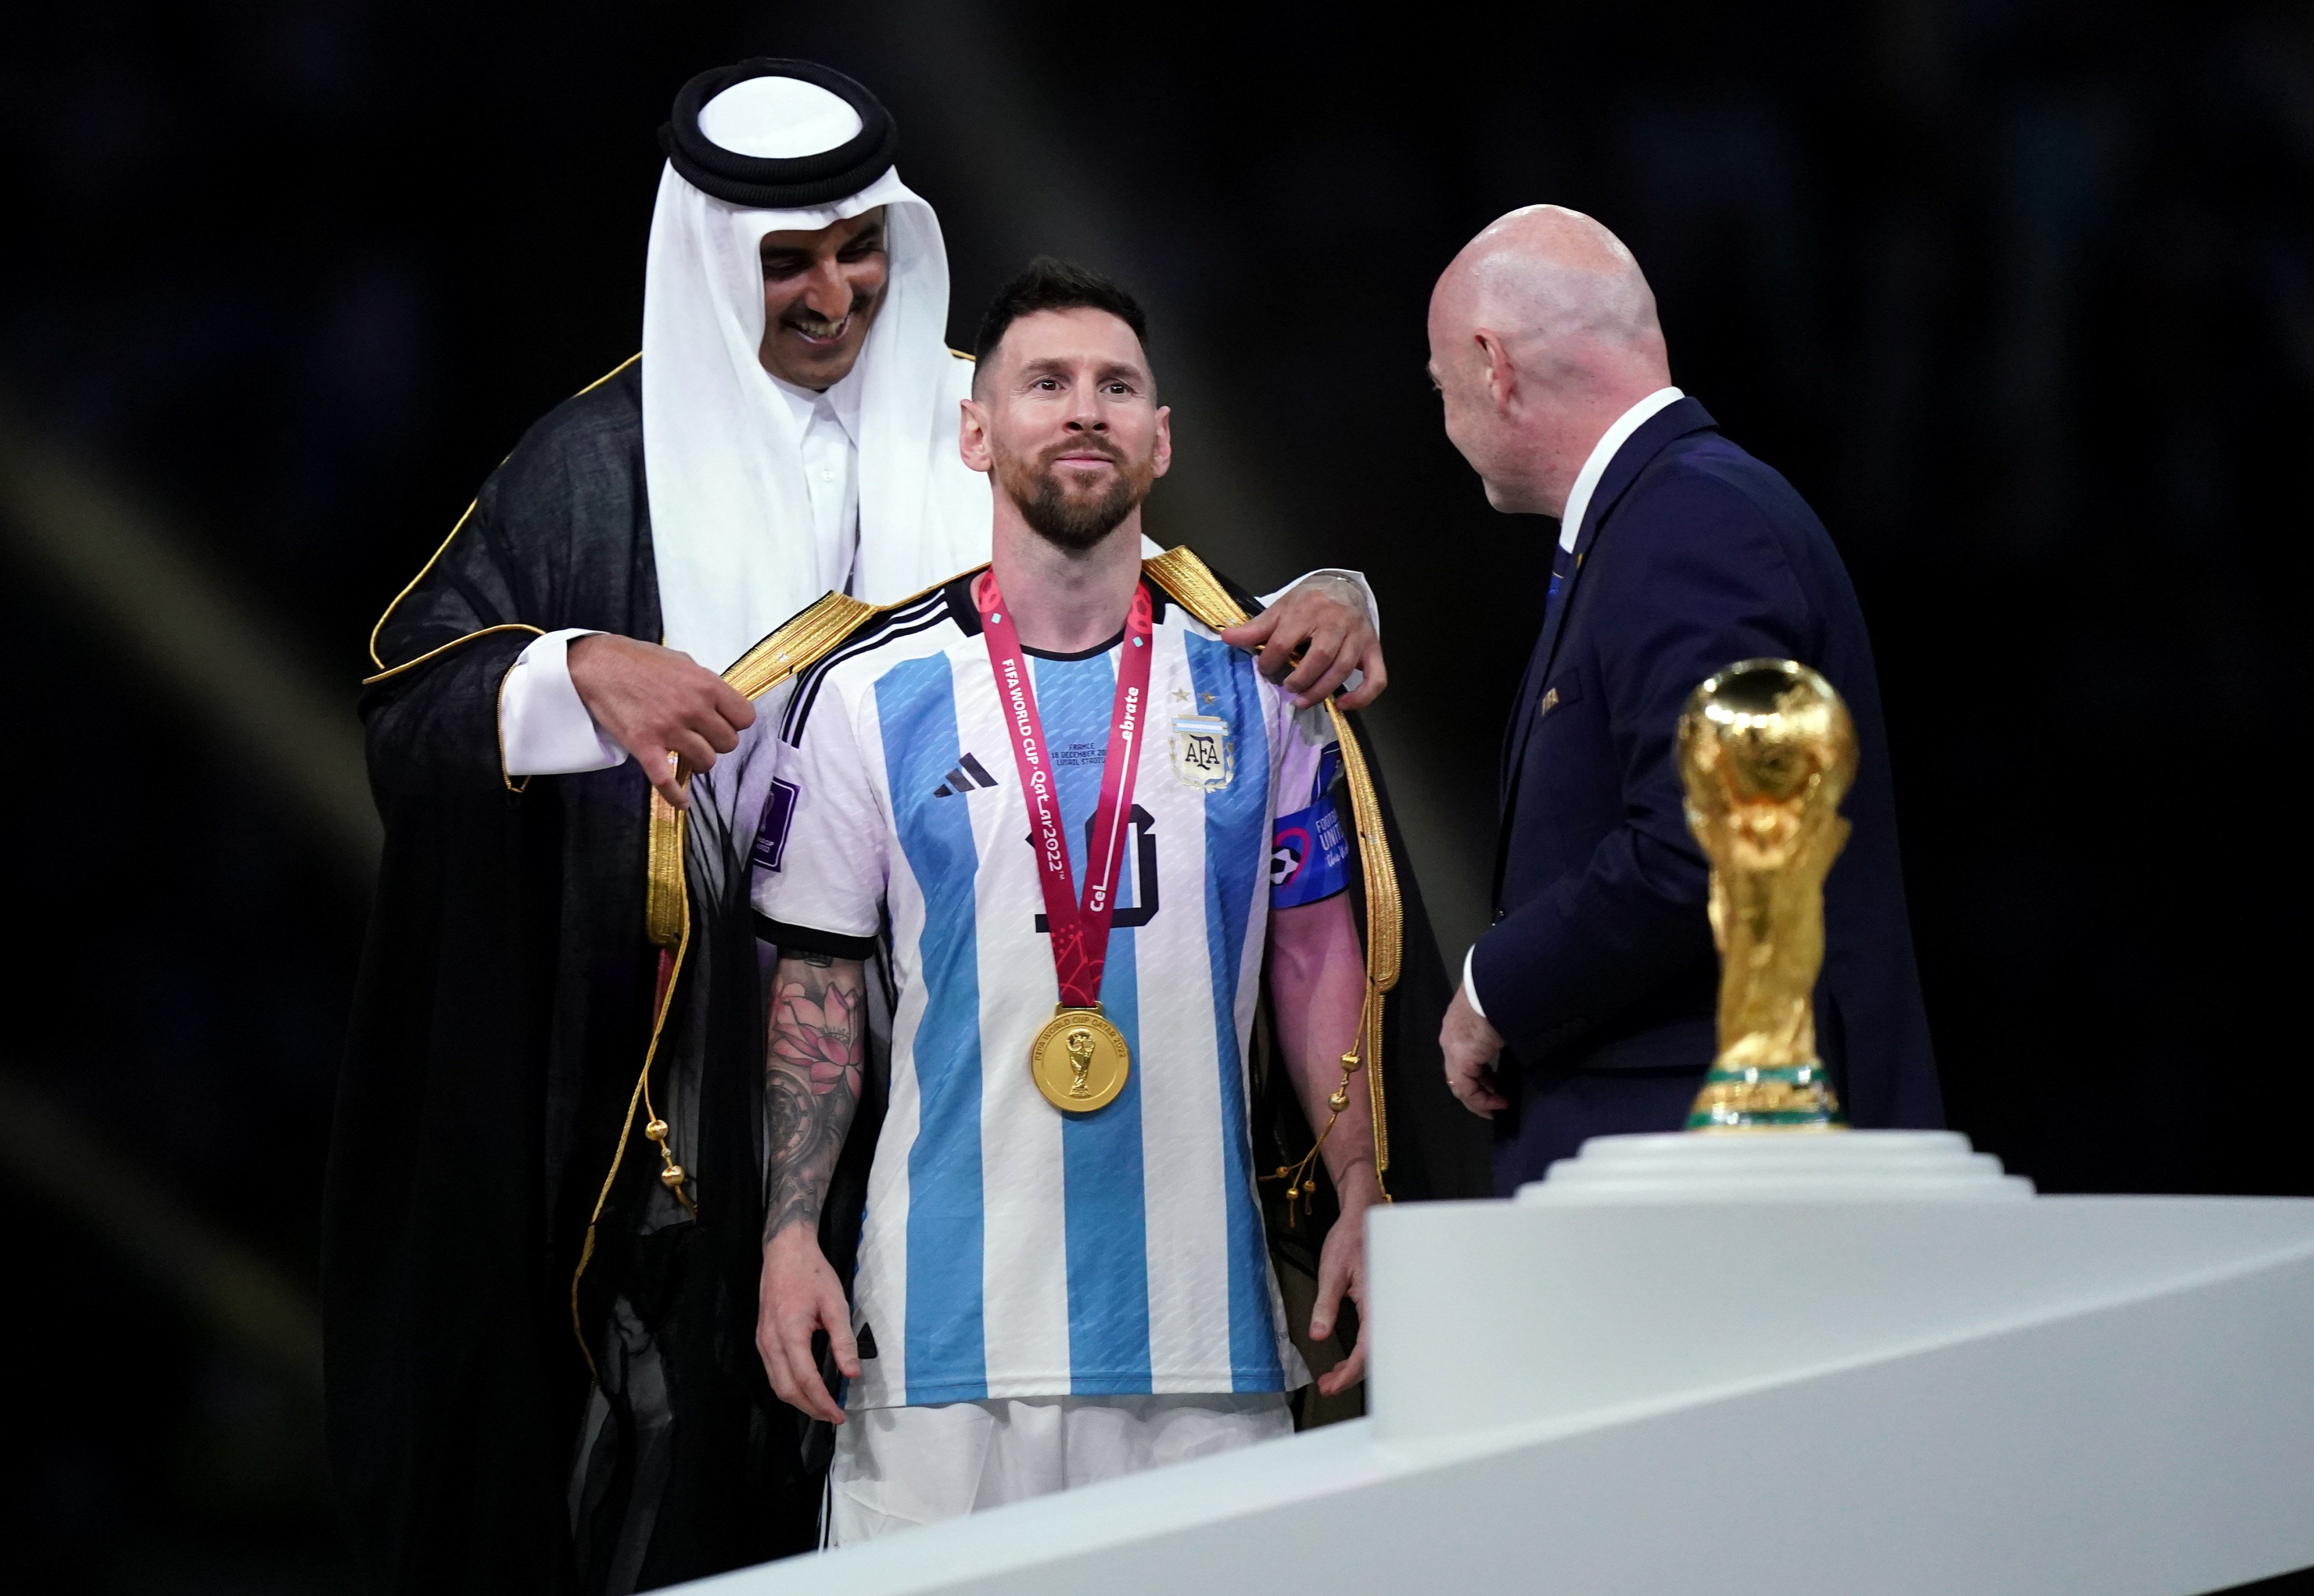 Qatar emir Sheikh Tamim bin Hamad Al Thani covers Argentina’s Lionel Messi in an Arab bisht as Fifa president Gianni Infantino waits to present the winning trophy at Lusail Stadium on December 18. Photo: PA Wire/dpa